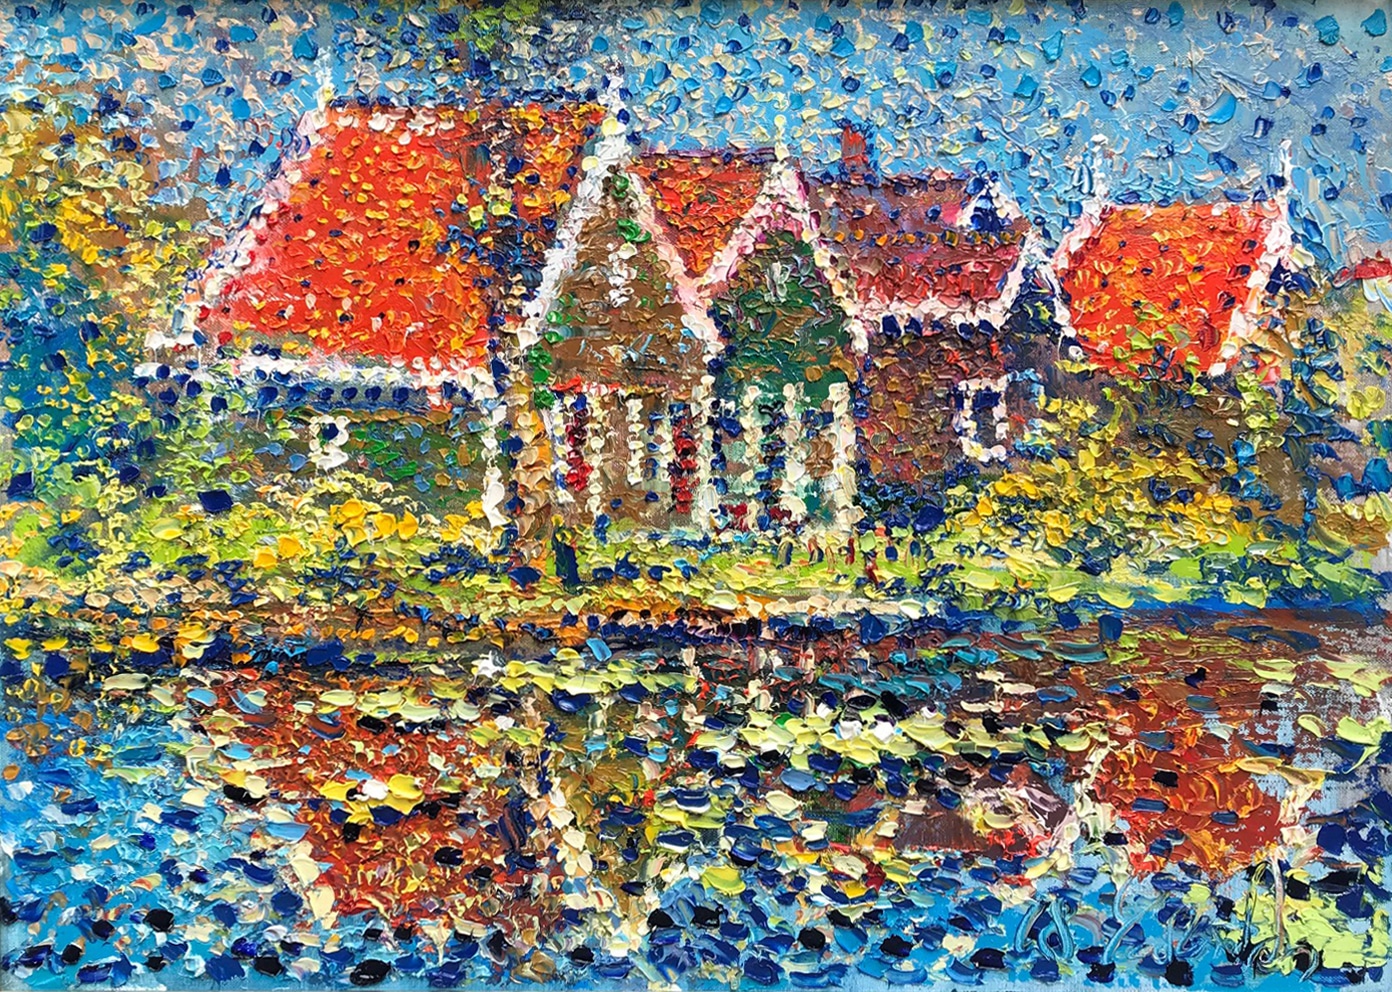 Houses on the shore, 2019